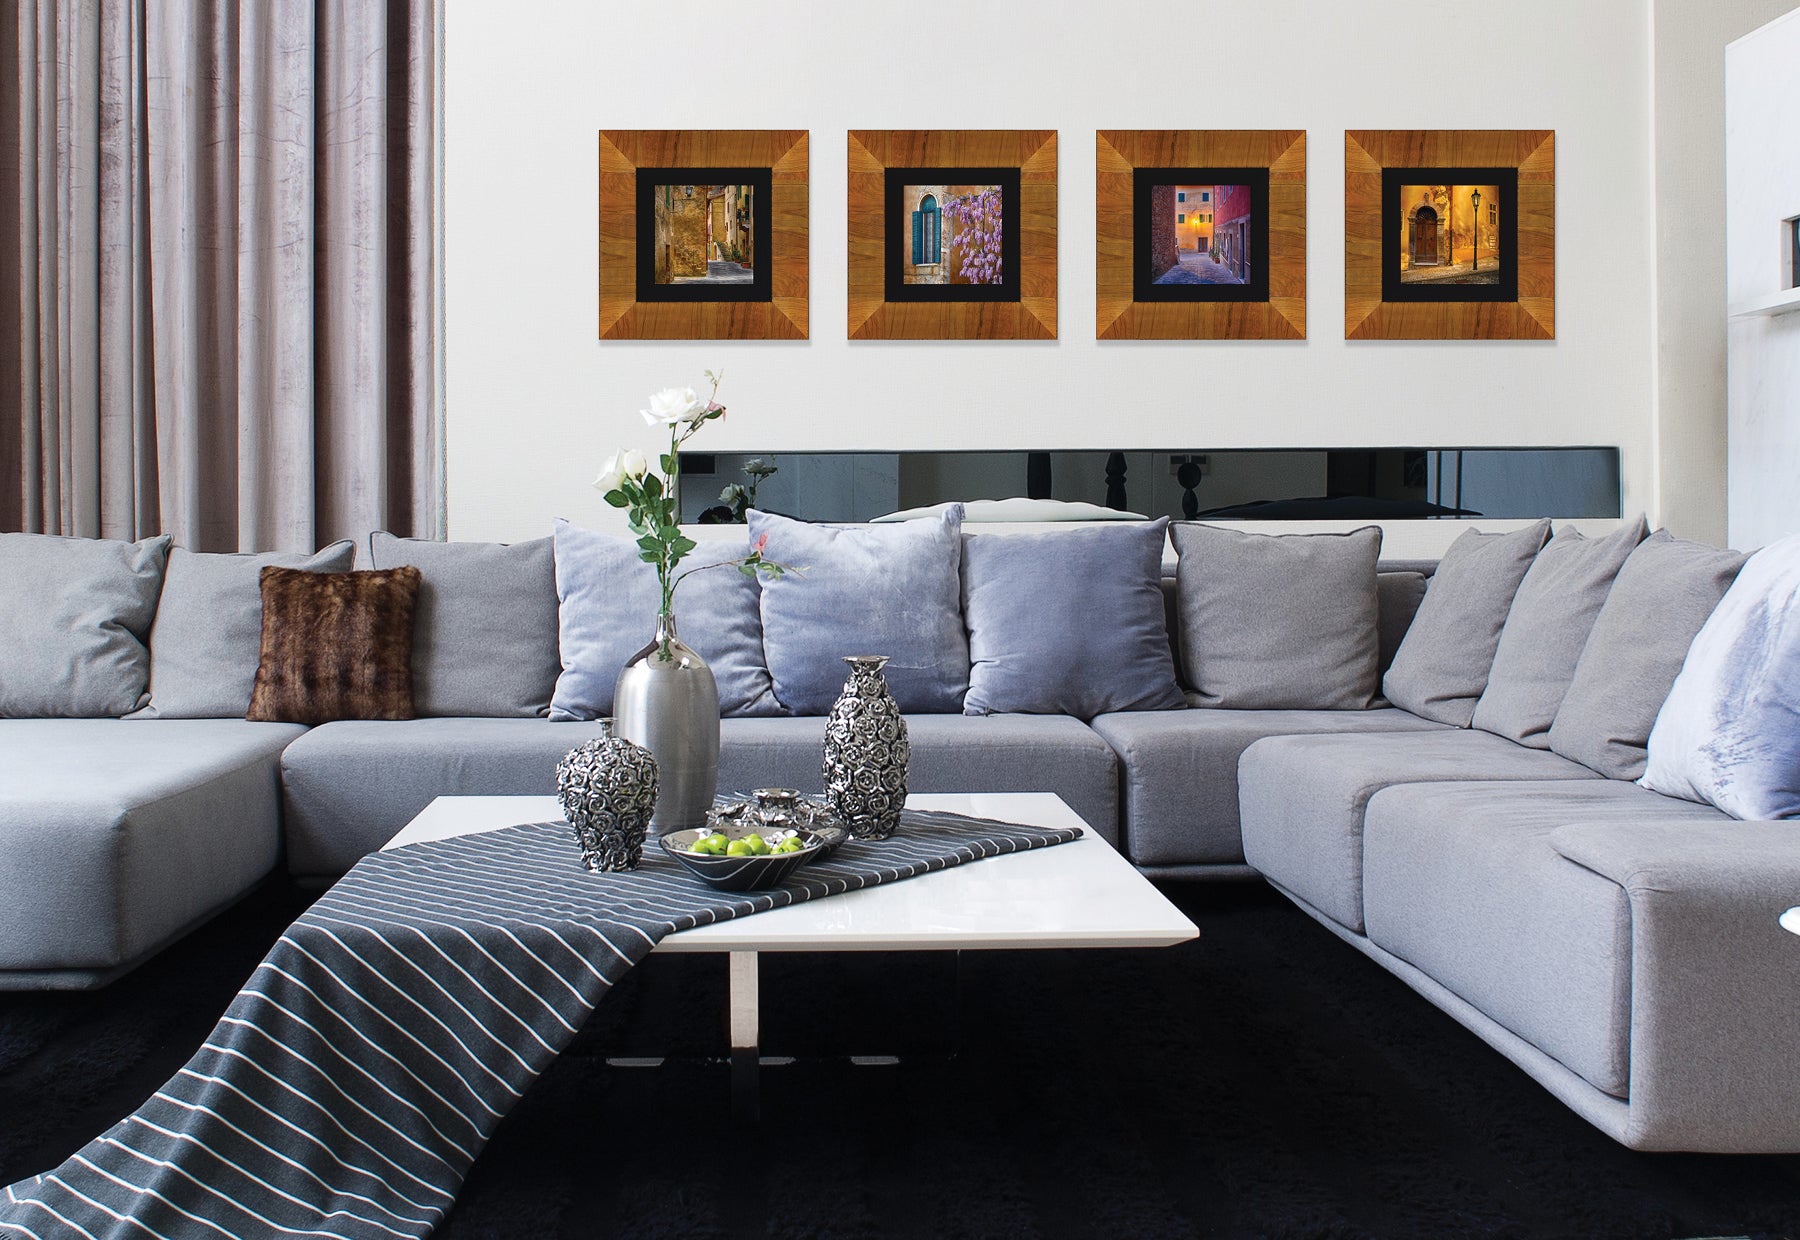 Modern living room with gray couch and white table featuring four framed square photographs of Italy by Peter Lik in light brown frames with black linen liners